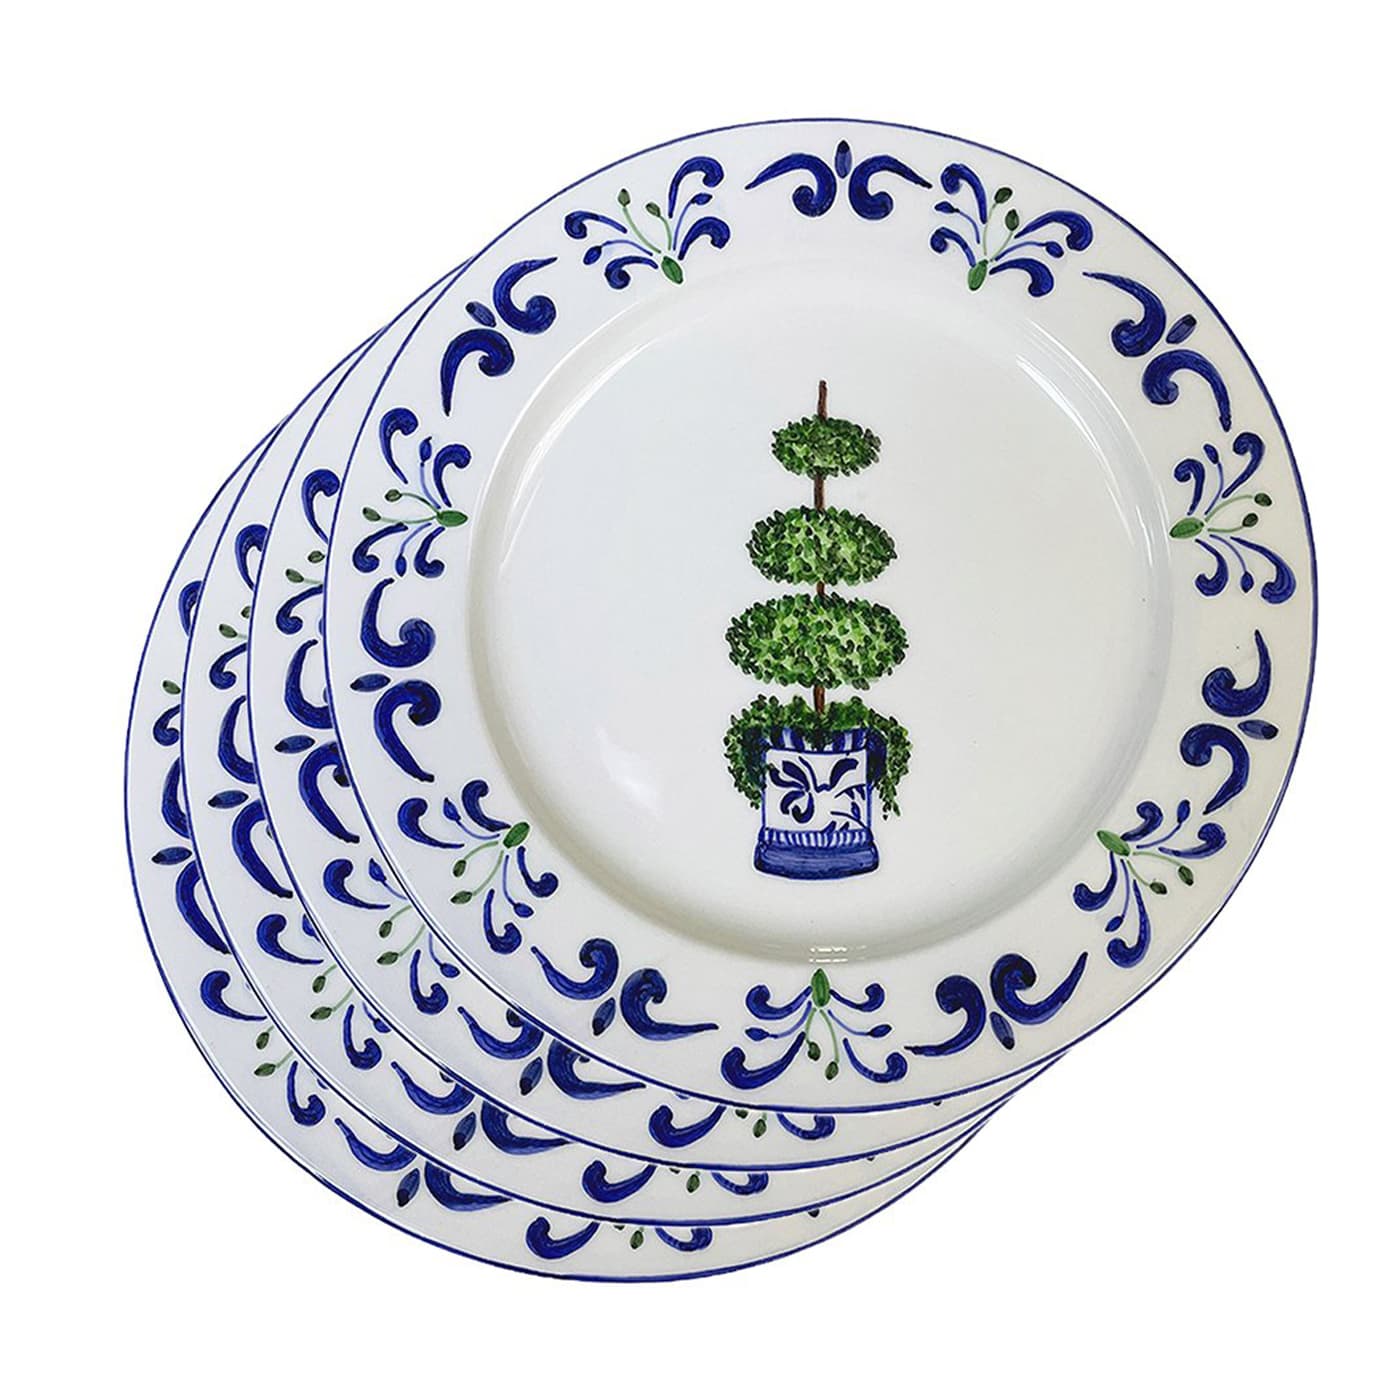 SET OF 4 TOPIARY BLUE DESSERT PLATES - Vio's Cooking